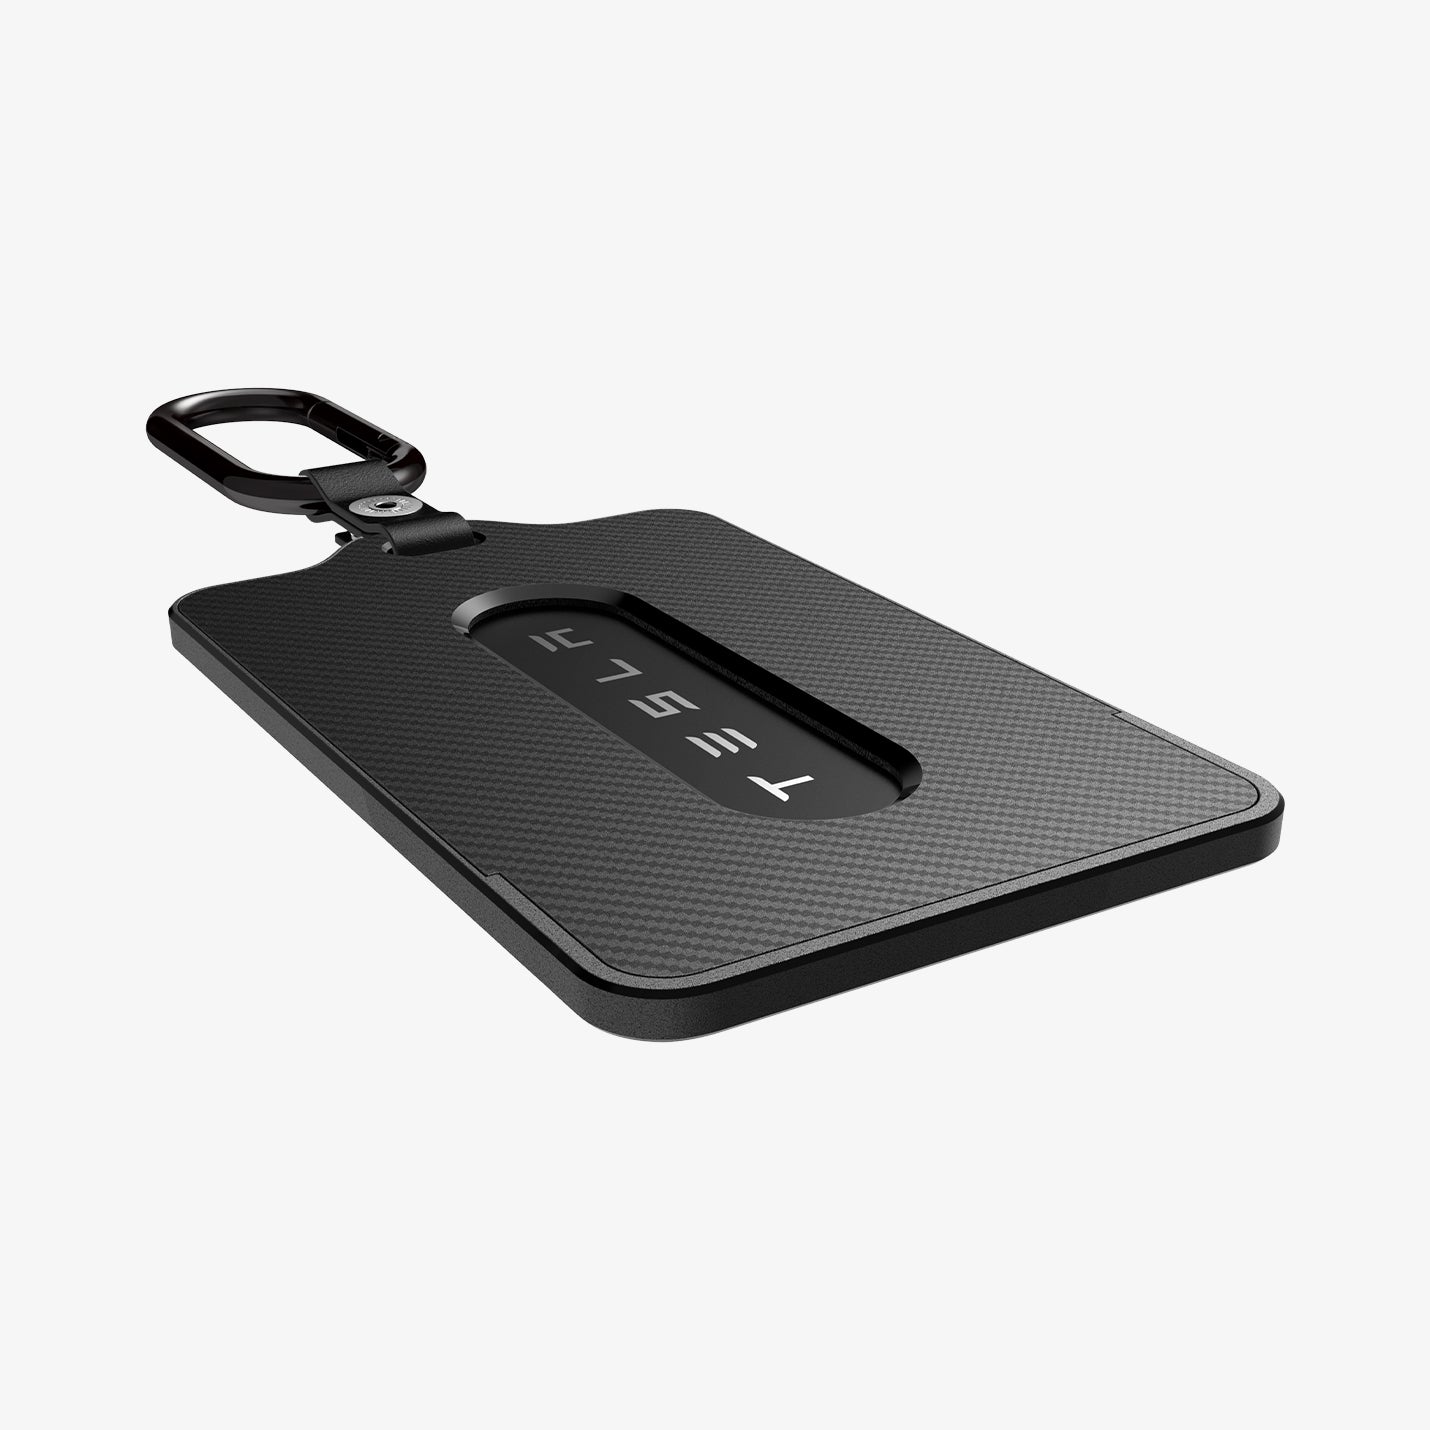 ACP07175 - Tesla Key Card Holder showing the front, side and bottom